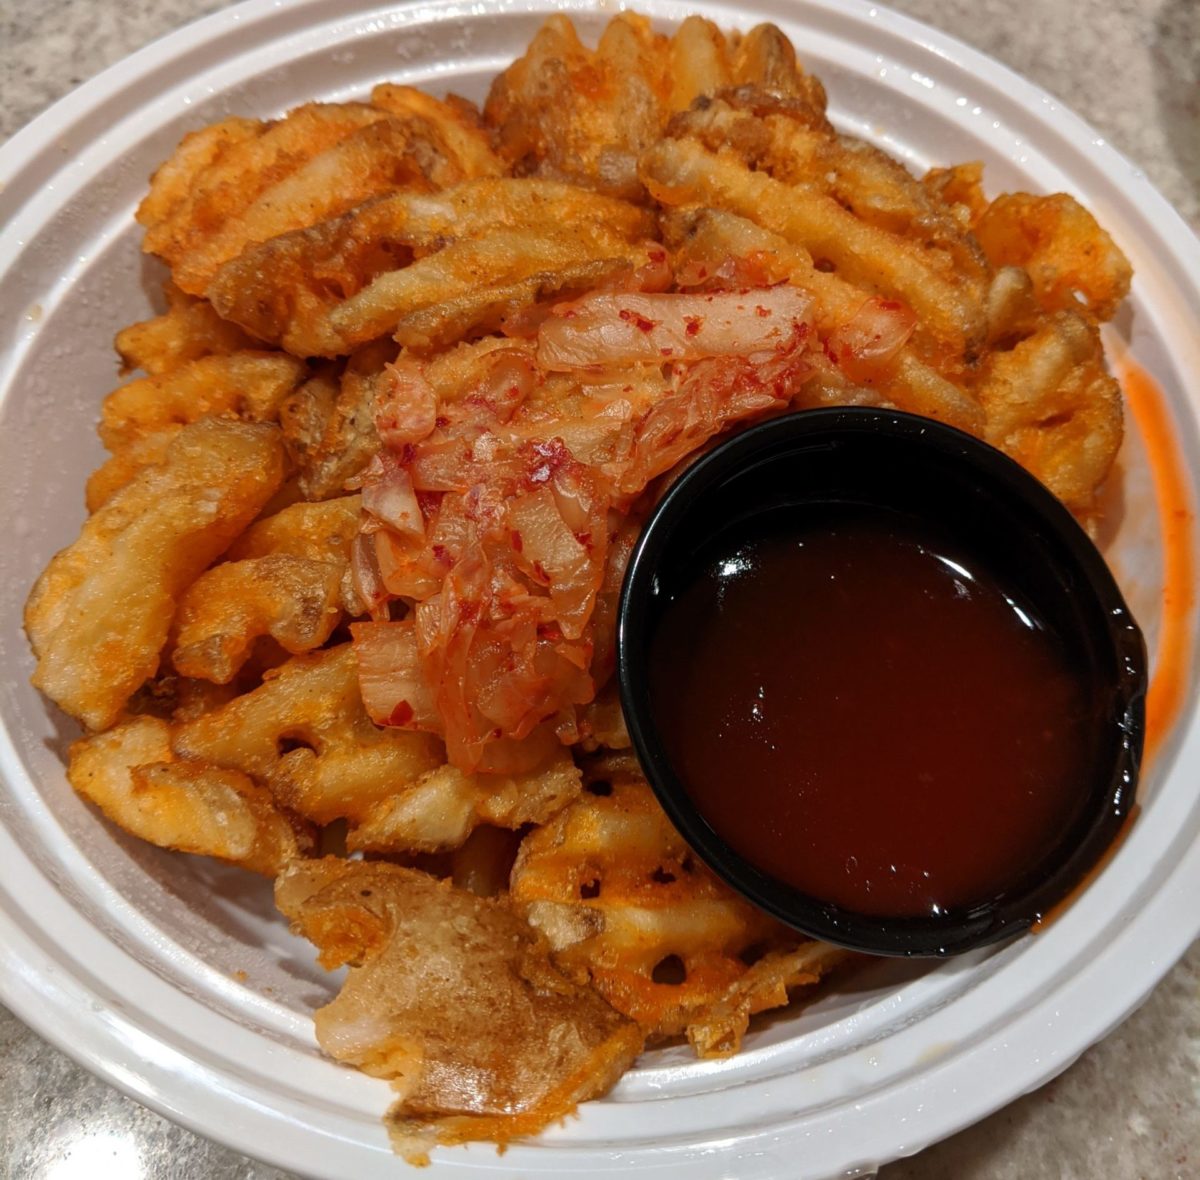 pop fries at xi xia by Fartley farms